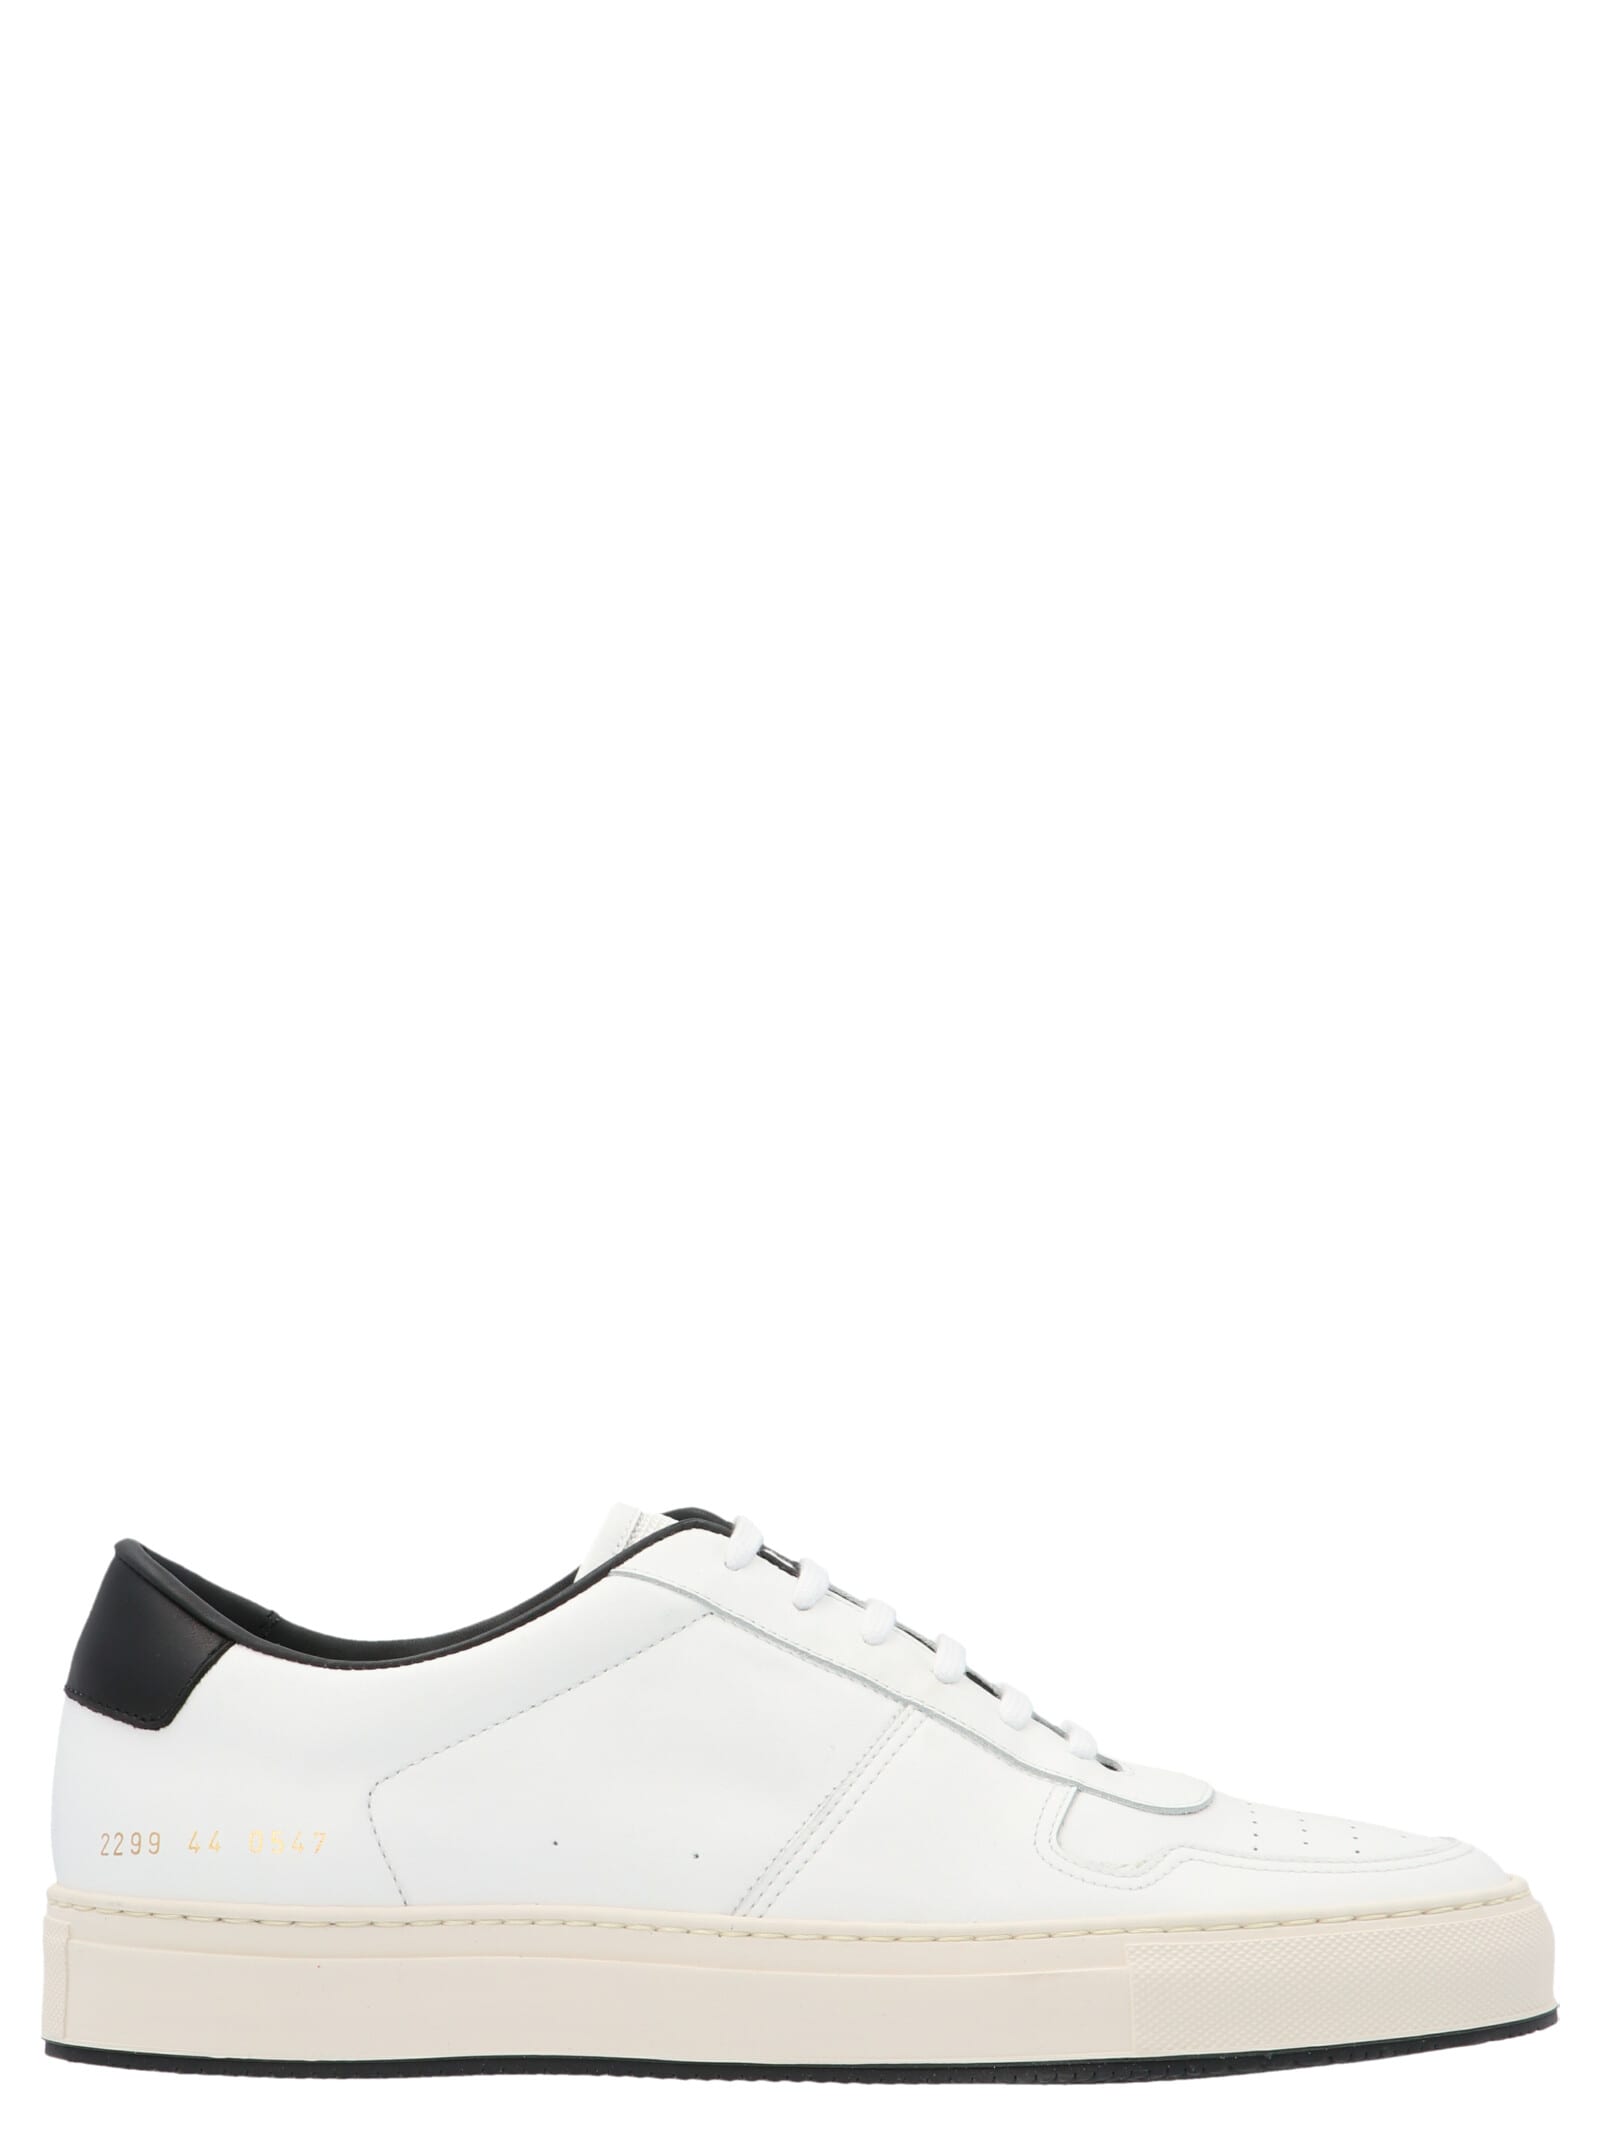 COMMON PROJECTS BBALL 90 SHOES,2299 0502